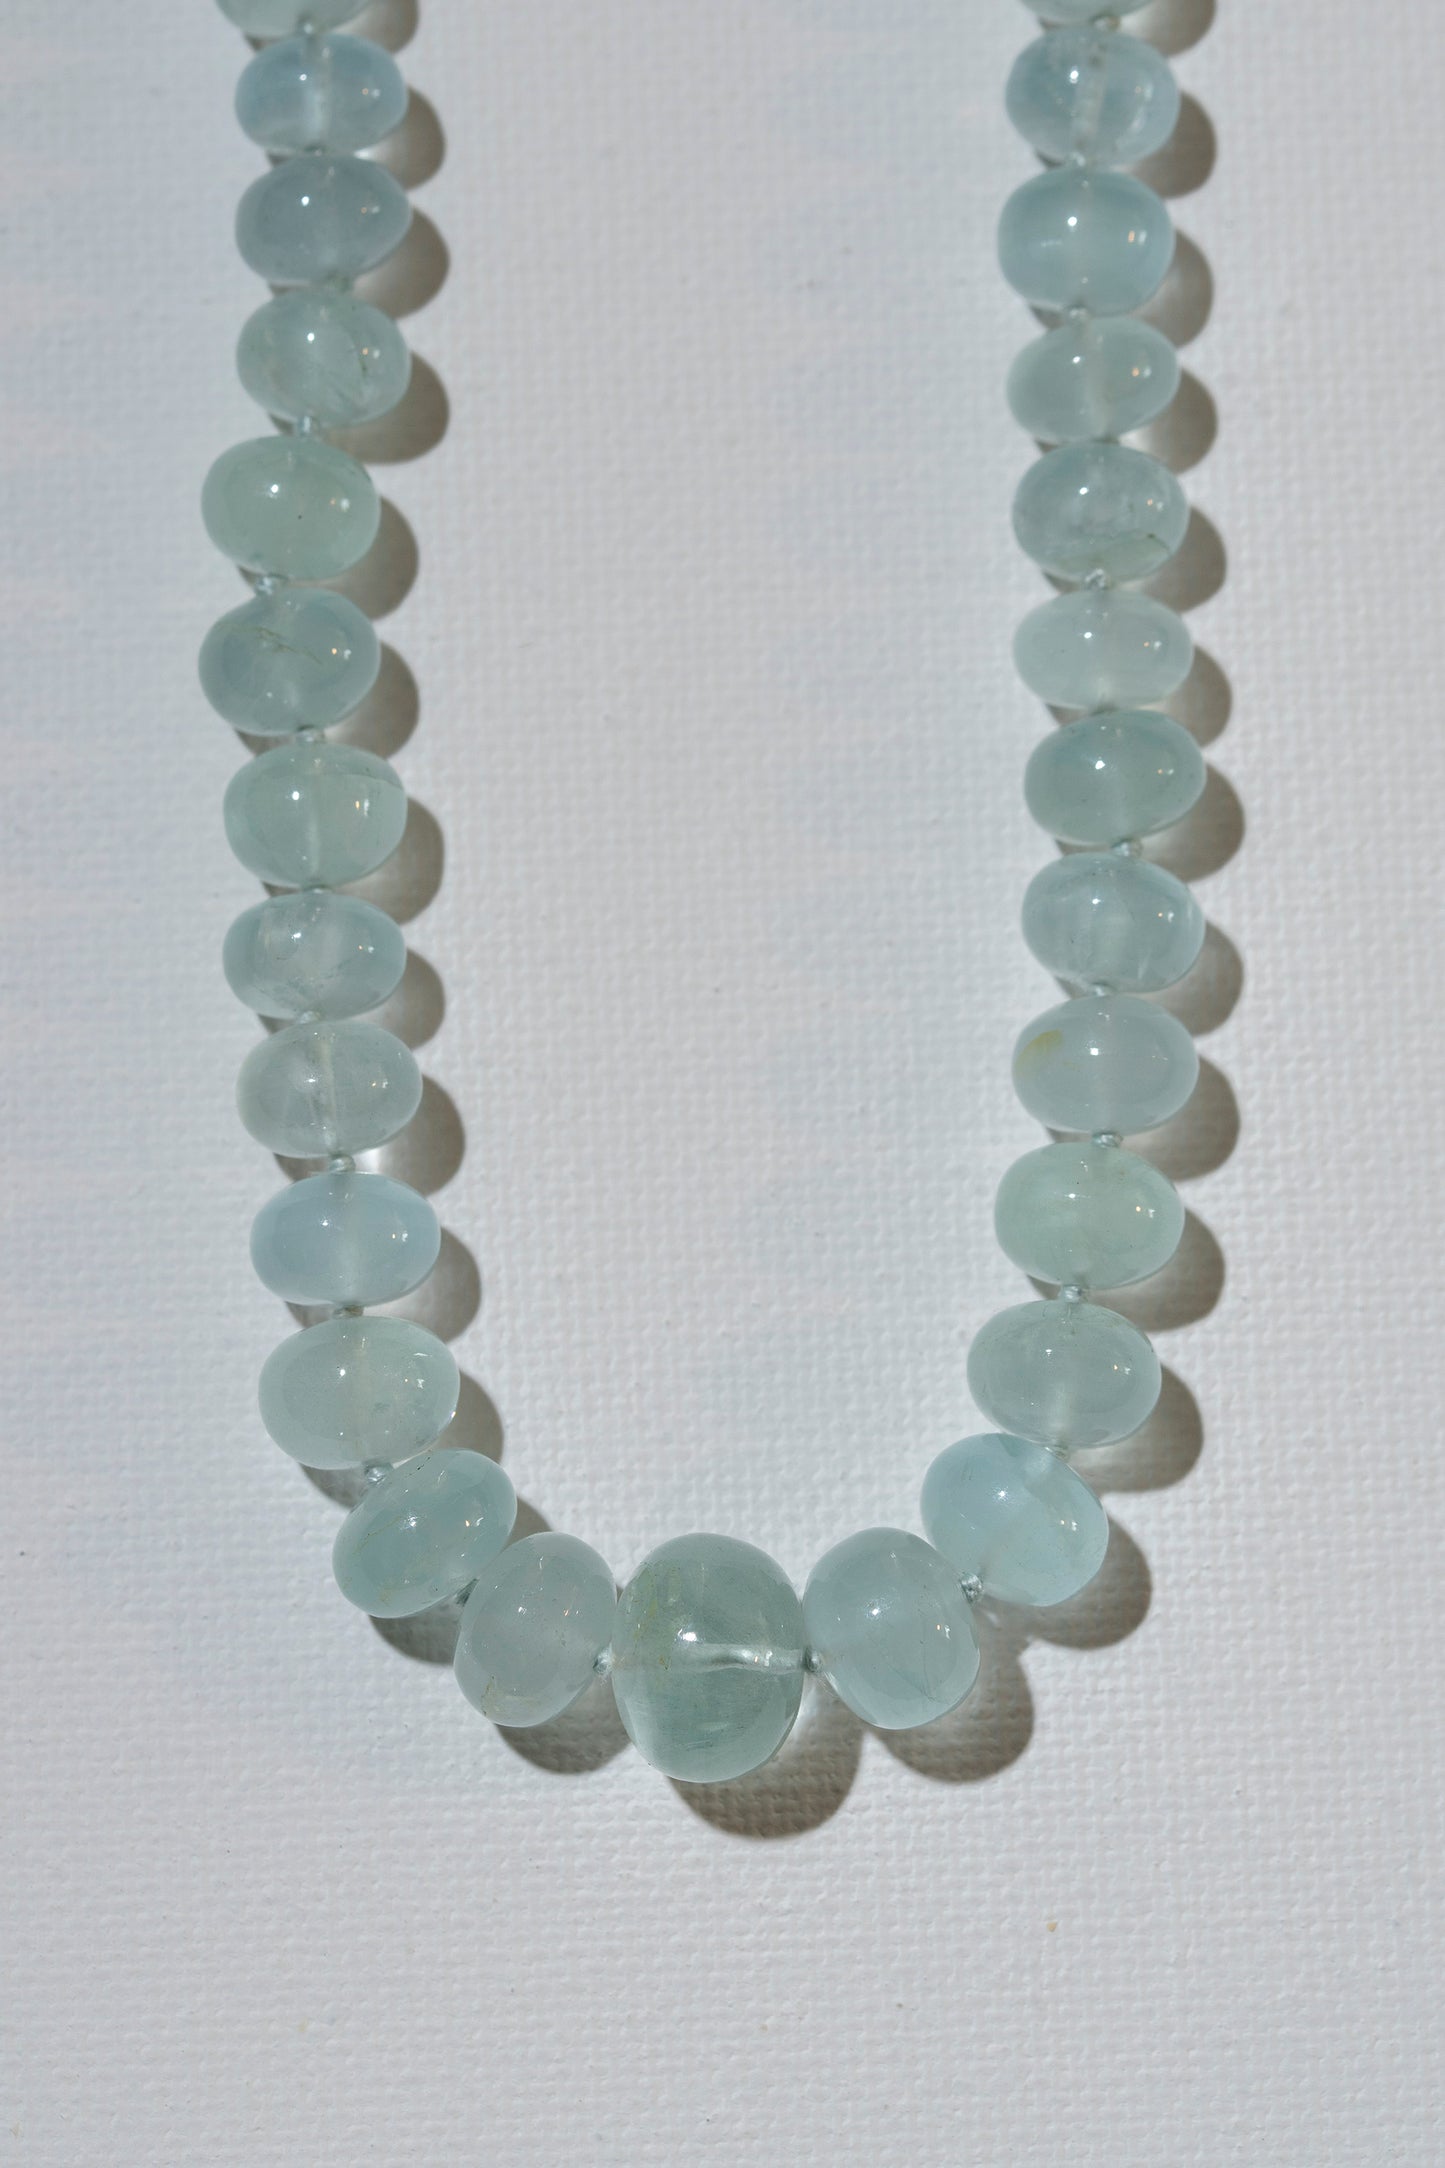 Sky Blue Aquamarine Knotted Candy Necklace smooth beryl knotted beaded necklace 14k solid gold